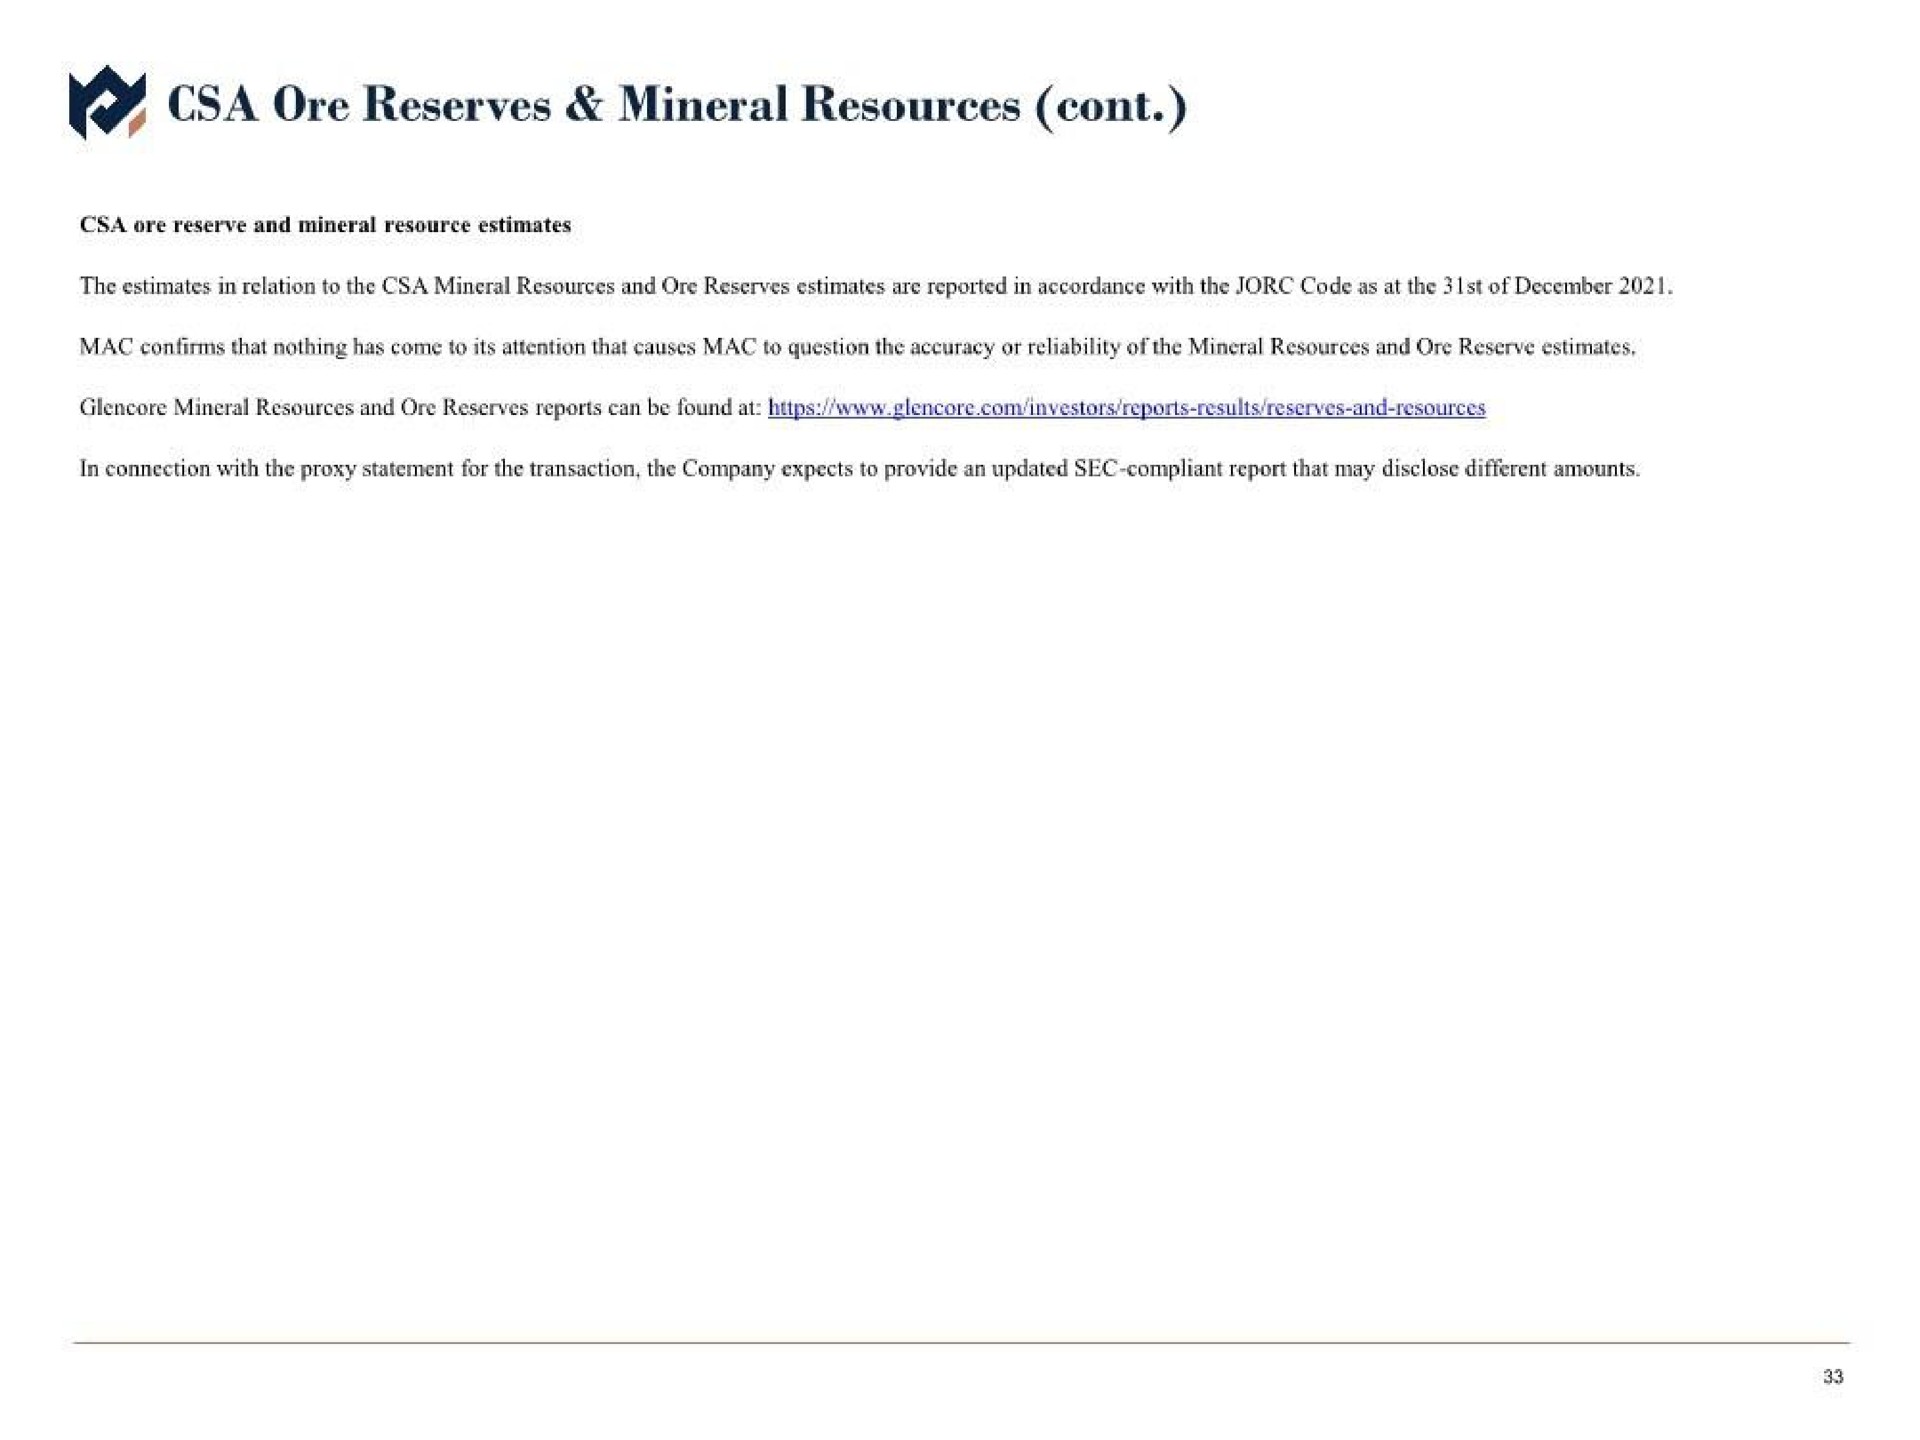 ore reserves mineral resources | Metals Acquisition Corp